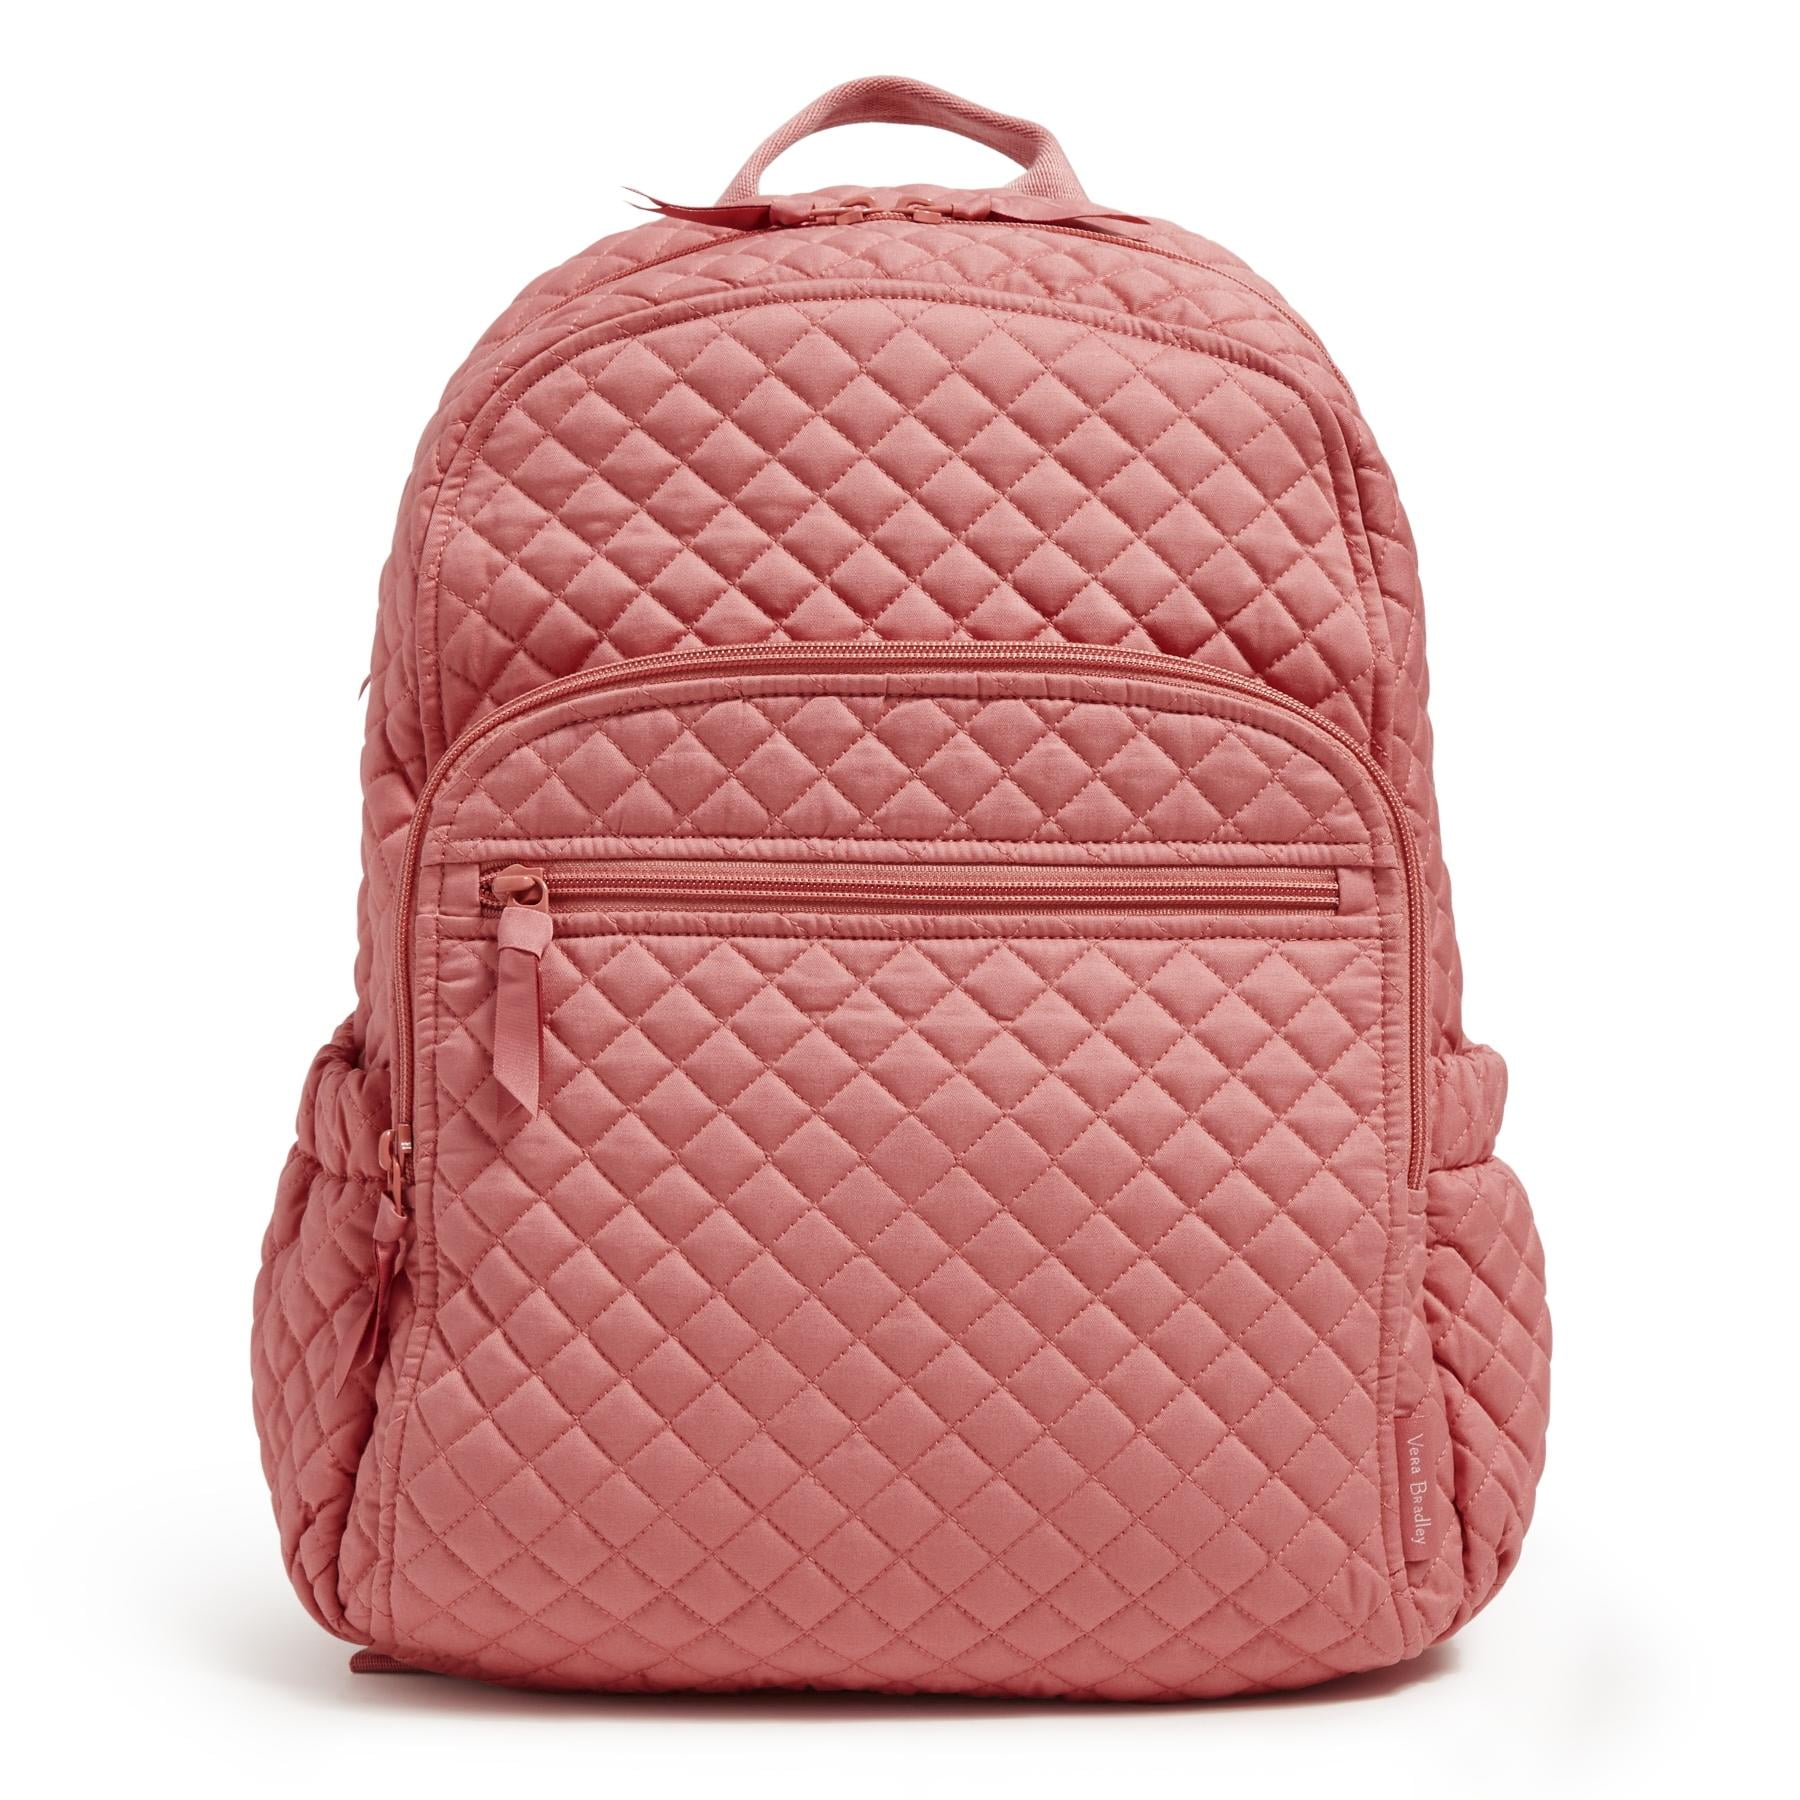 Vera Bradley Women's Cotton Campus Backpack Rosy Outlook 